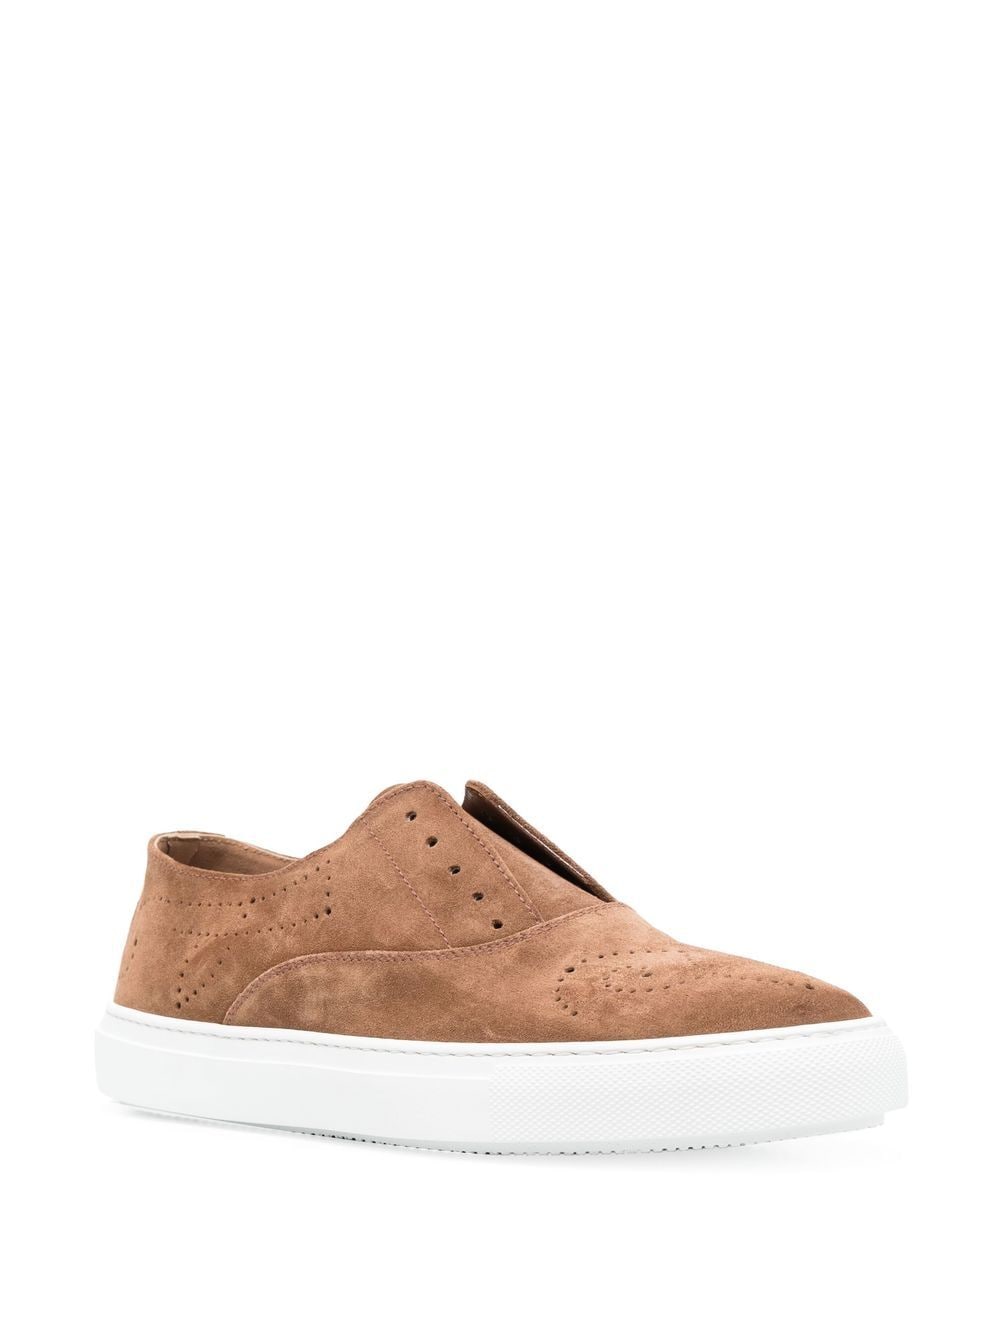 cognac brown sneaker without laces